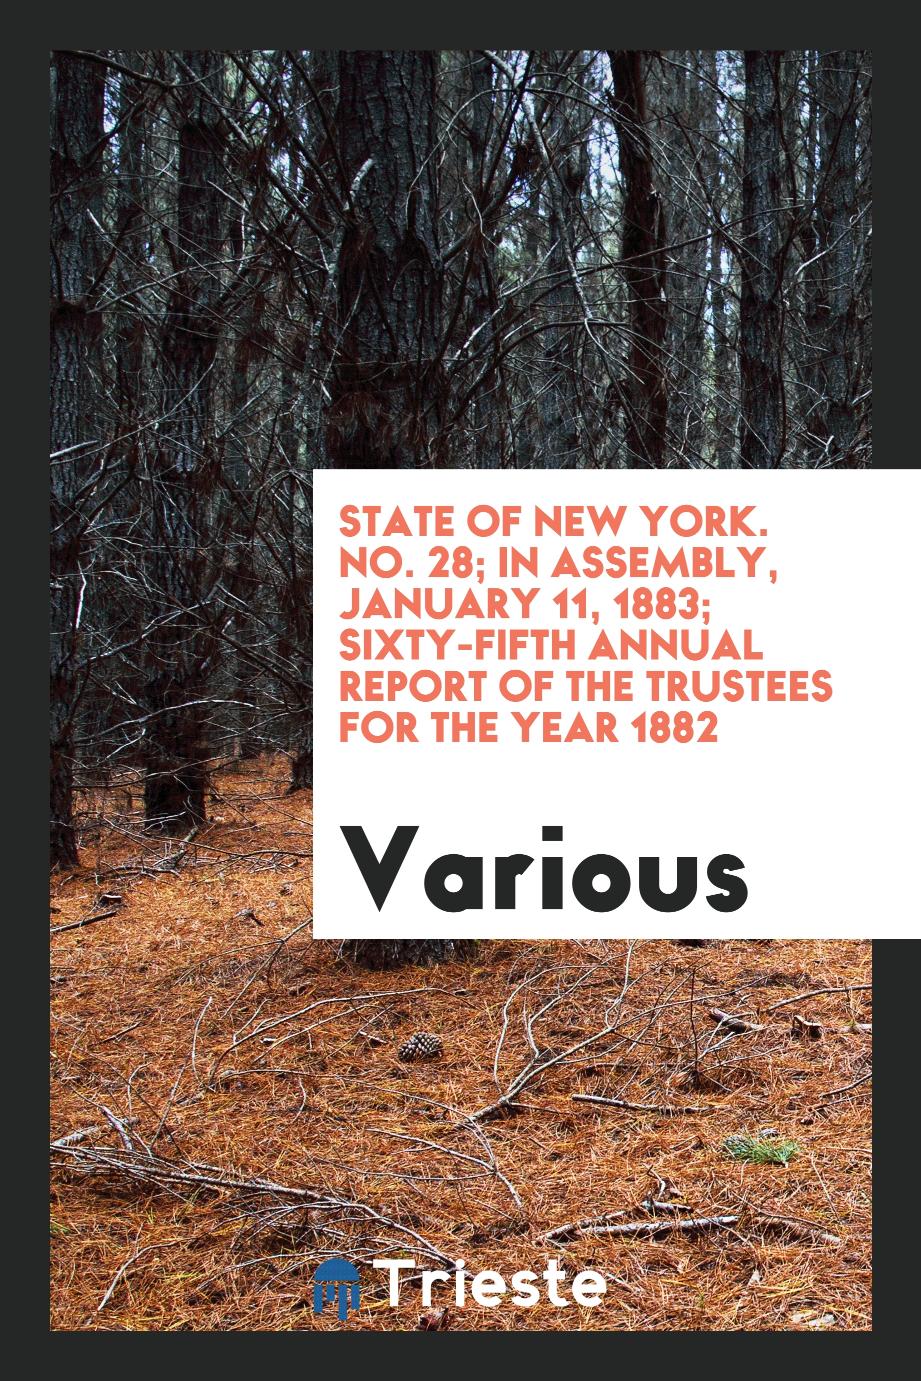 State of New York. No. 28; In Assembly, January 11, 1883; Sixty-Fifth Annual Report of the Trustees for the Year 1882